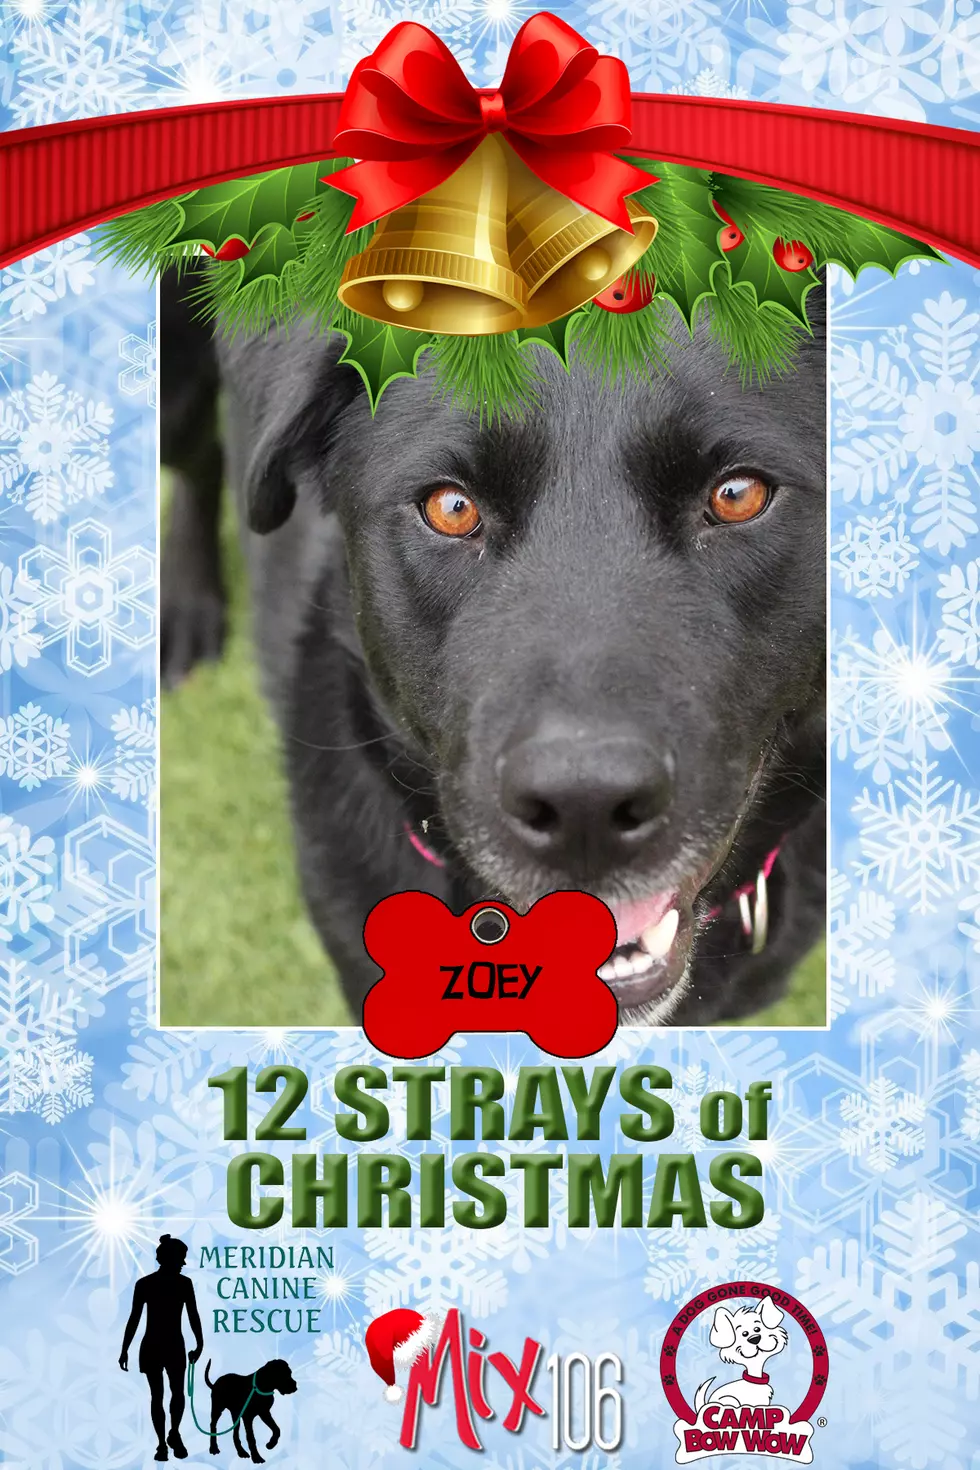 #11 of Mike & Nicole’s 12 Strays of Christmas – Zoey